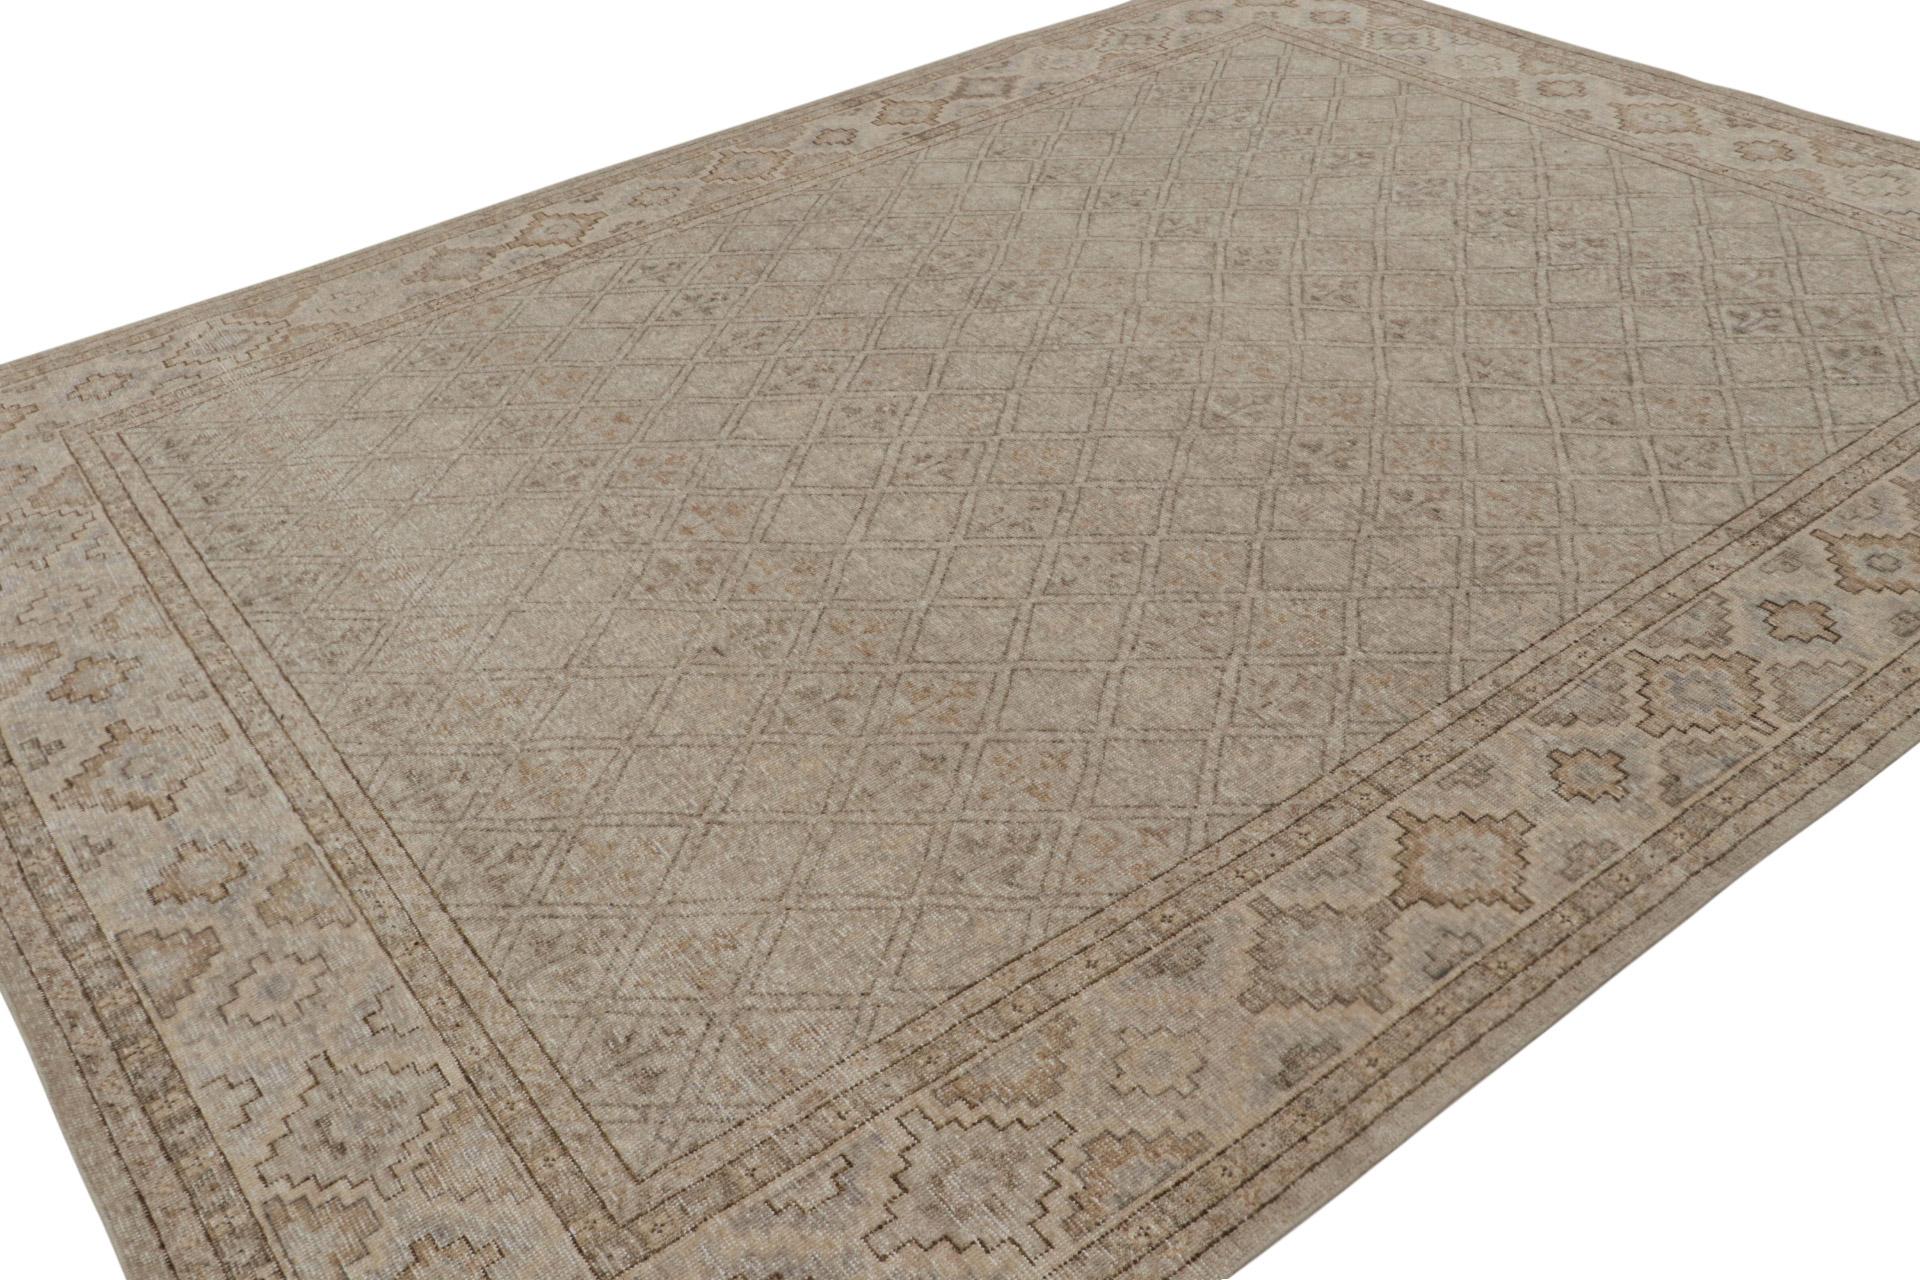 This 9×12 rug is a new addition to the Homage Collection by Rug & Kilim.

On the Design: 

Hand knotted in wool, this piece enjoys an elaborate geometric pattern in forgiving beige, gray, and blue. Keen eyes will admire a natural play of classic